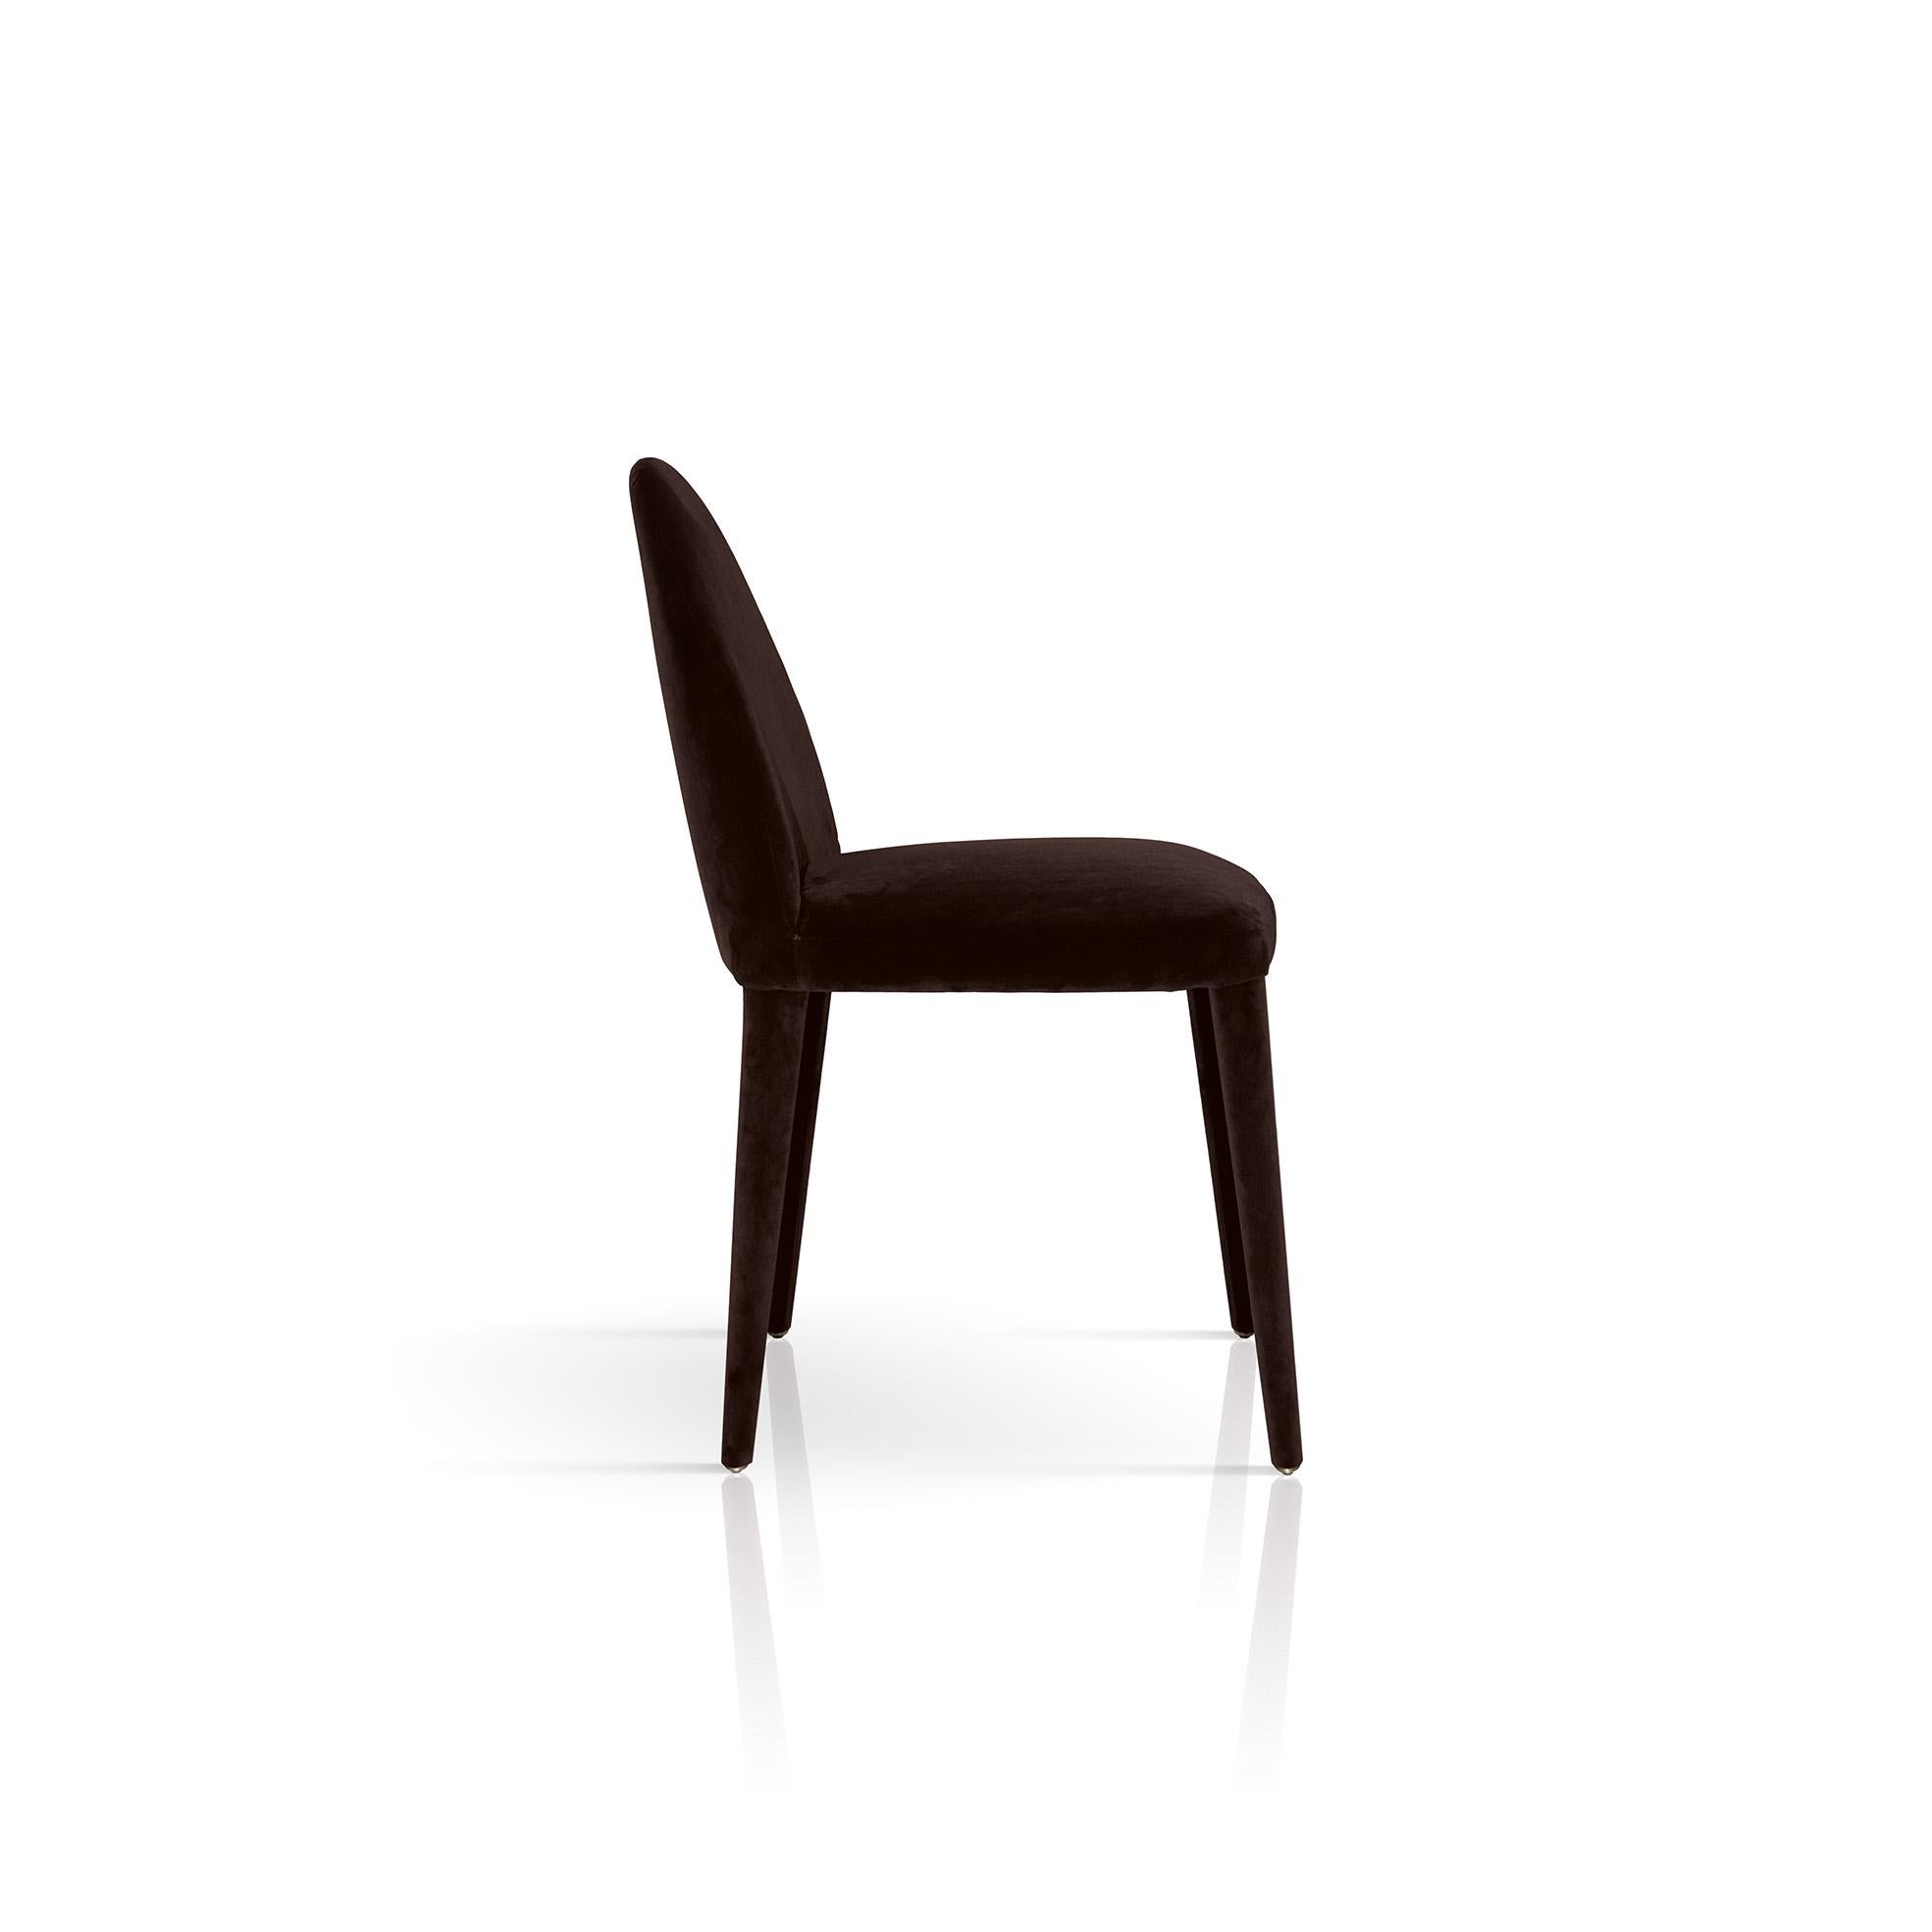 Timeless charm and simple elegance set this chair apart. Entirely upholstered in mocha brown velvet, this design is a perfect balance of modern materials and classic shapes, featuring slender legs with brass ferules, rounded backrest, and a spacious